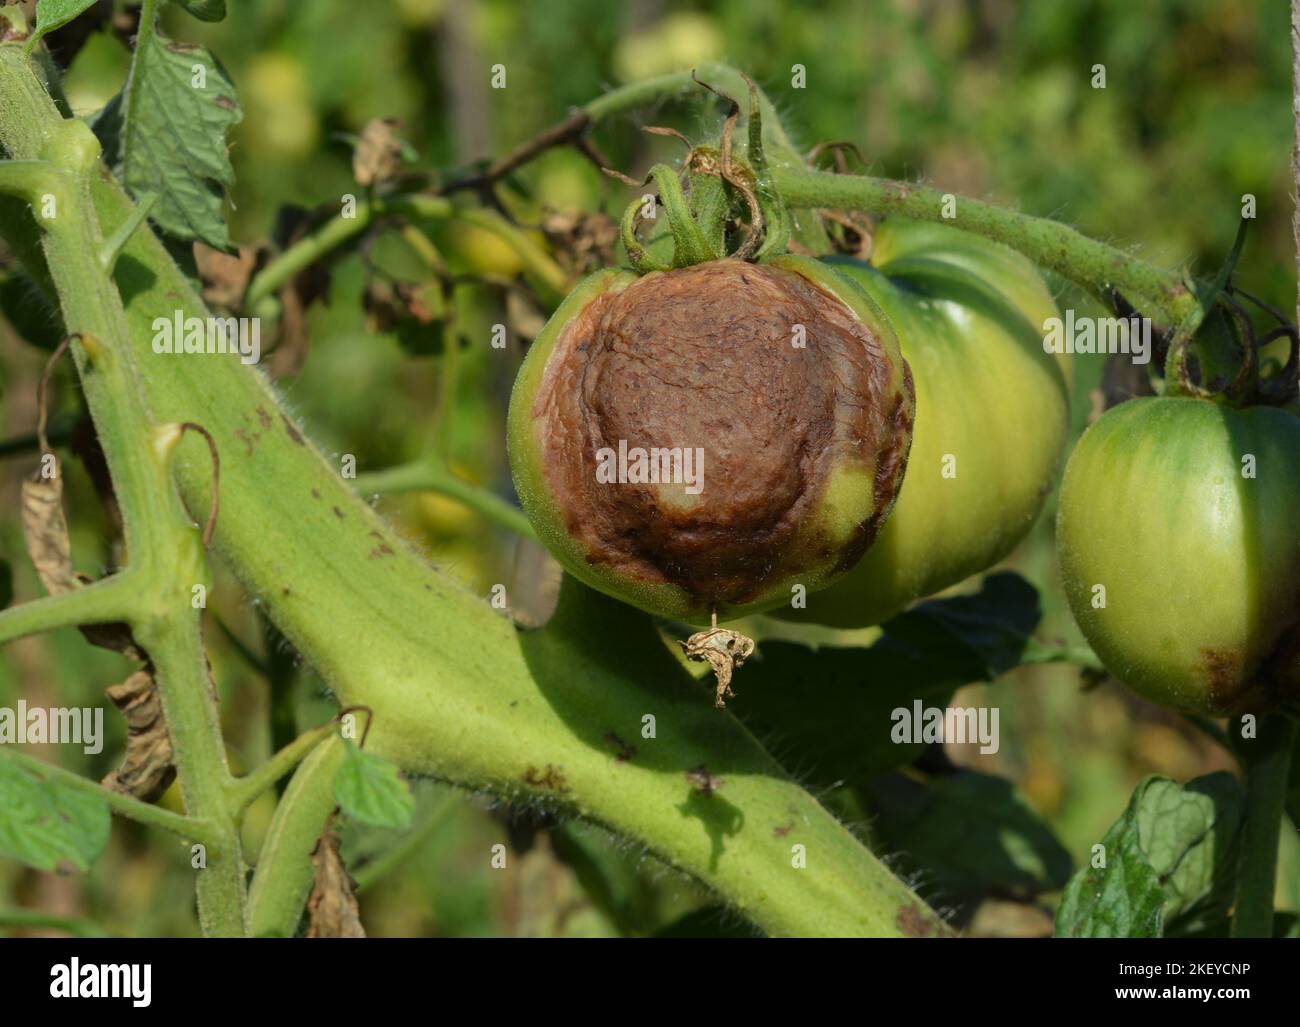 Tomato disease. The fungus buckeye rot of tomato caused by the pathogen Phytophthora parasitica badly affected a tomato plant. Stock Photo